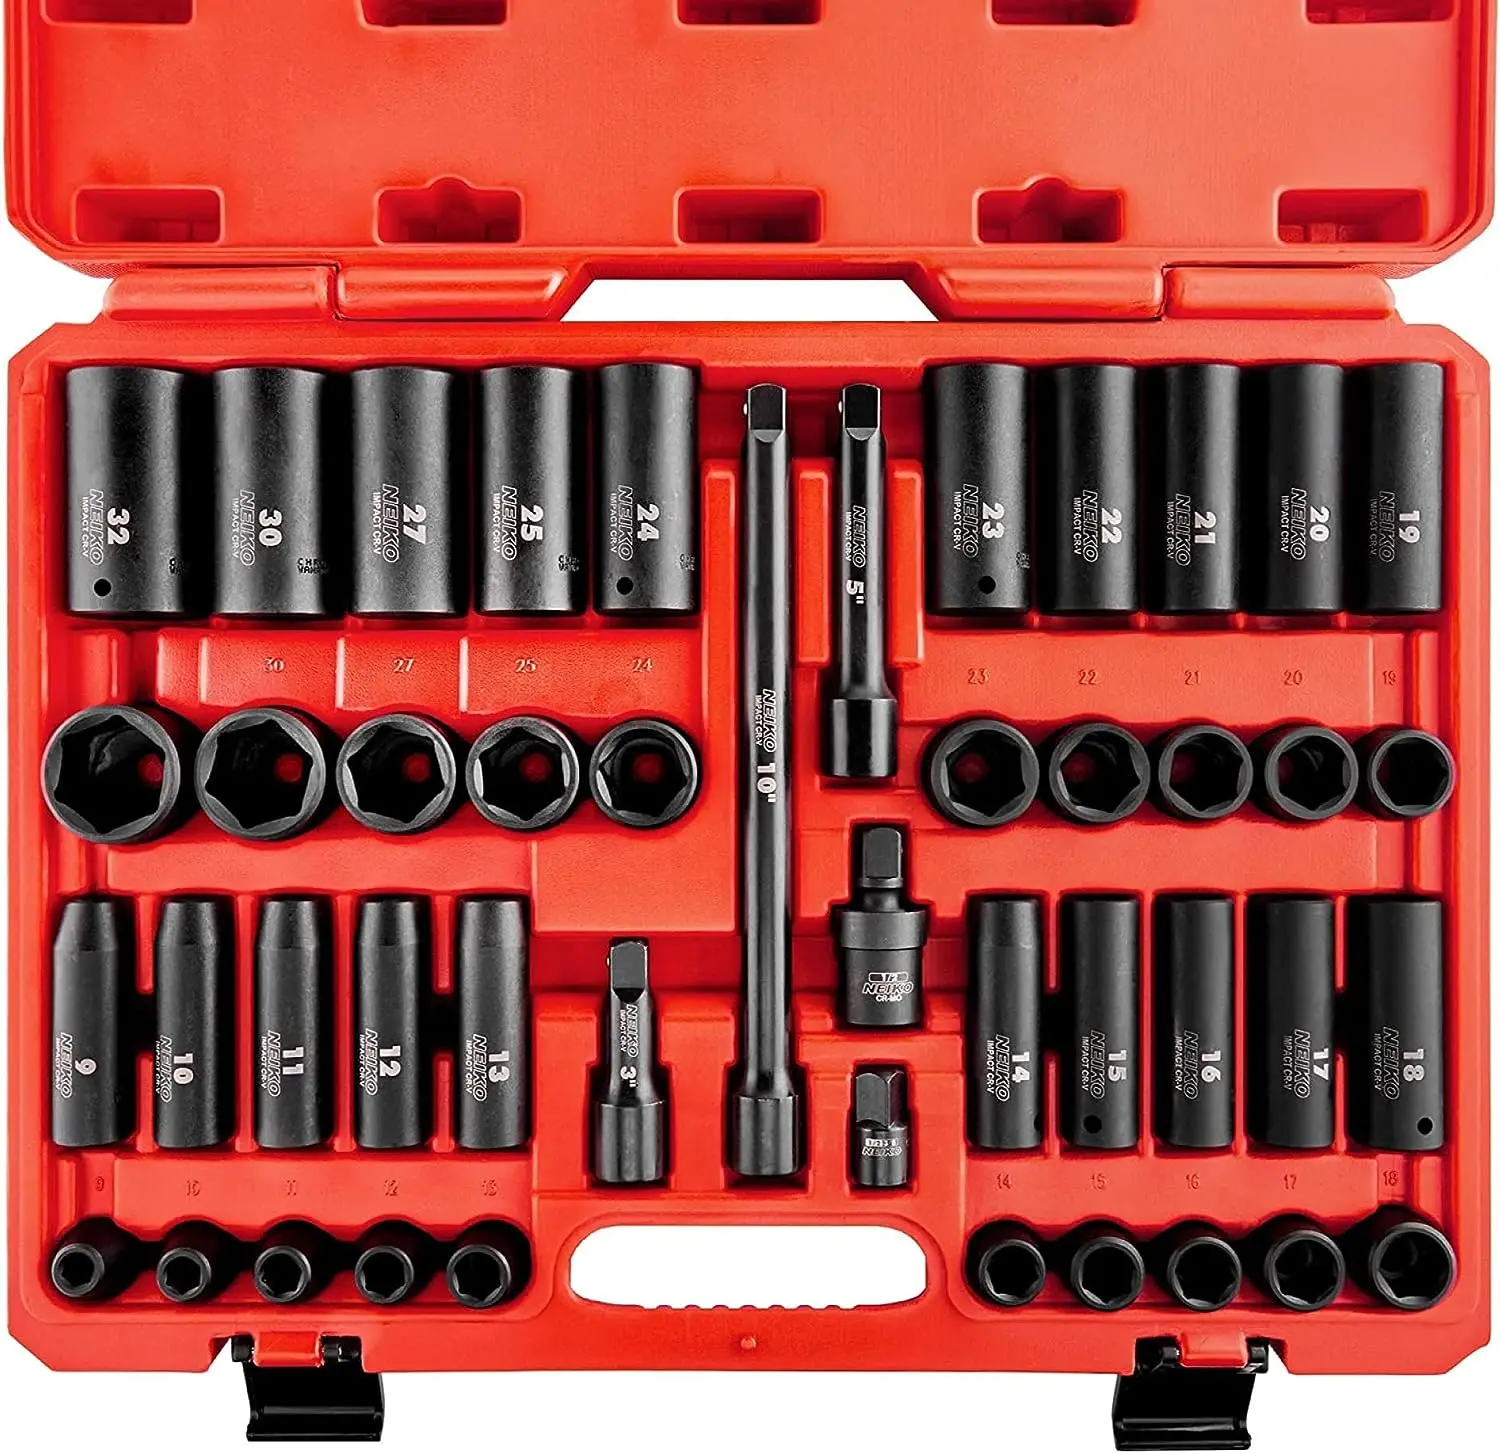 

1/2 Socket Set, 45 Piece Deep and Shallow Assortment, Metric Sizes 9mm to 32mm, Chrome Vanadium Steel, Extension Bars, Joint a